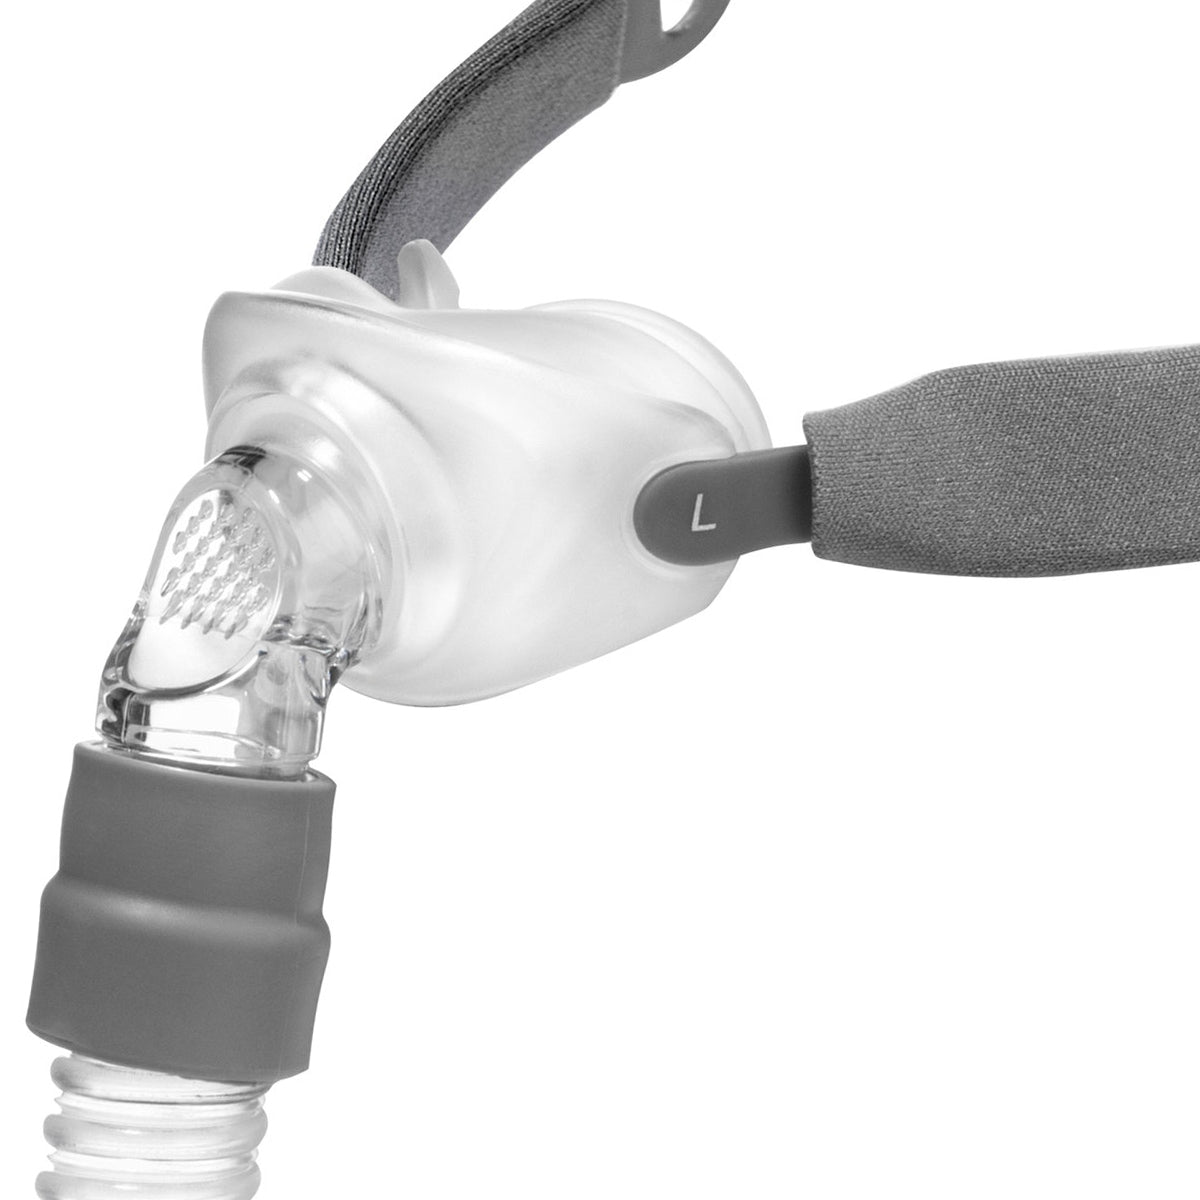 The Rio II Nasal Pillows CPAP Mask was designed with a unique rotating ball in socket swivel to allow for freedom of movement throughout the night making it the ideal Nasal Pillows Mask for active sleepers.